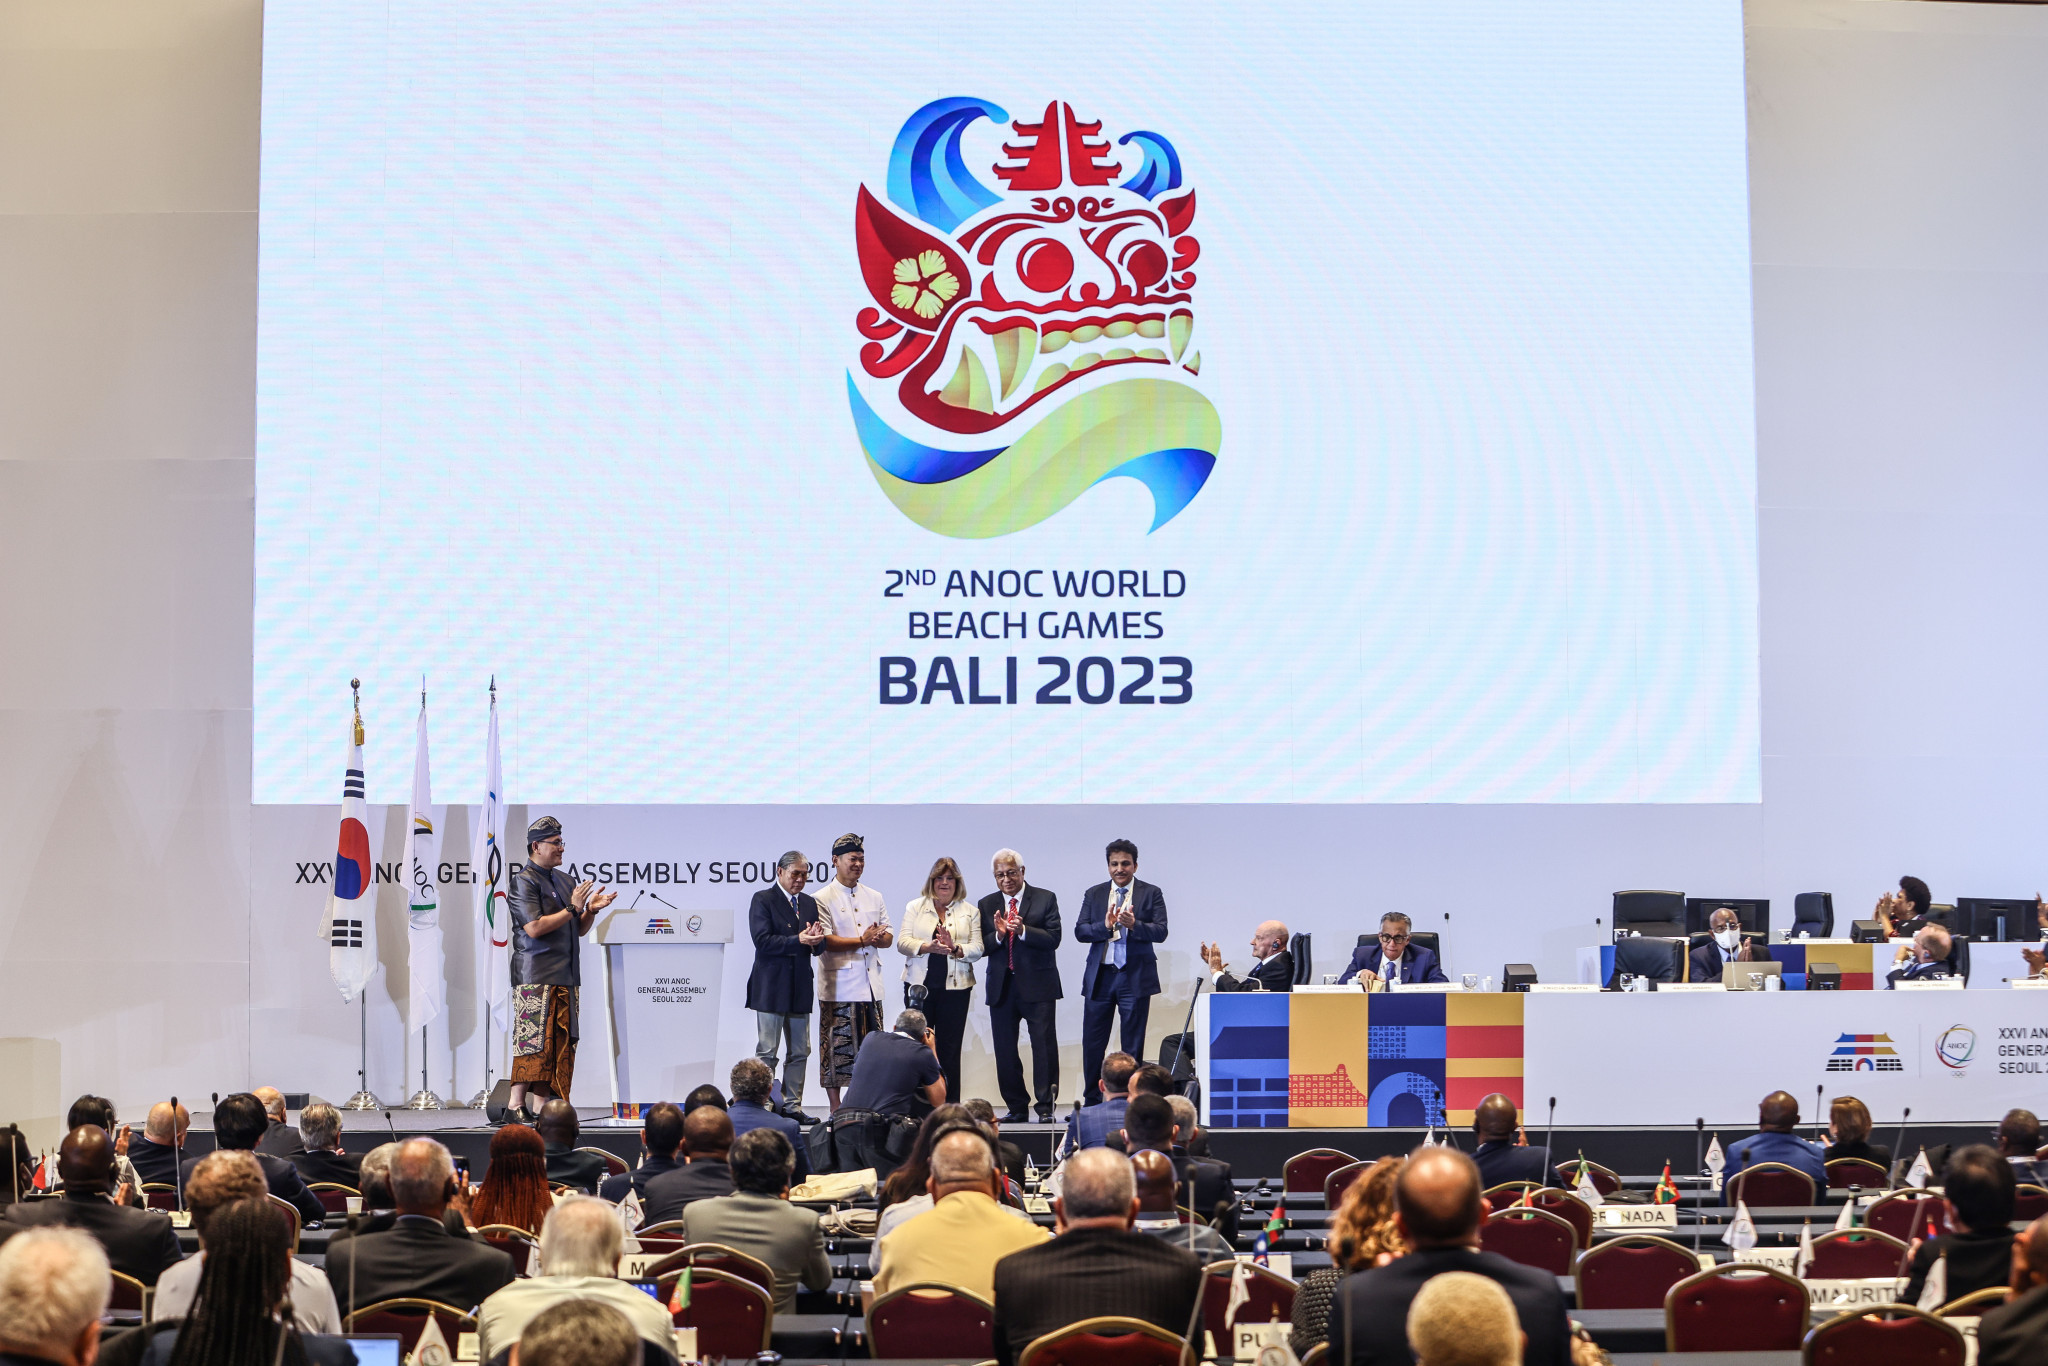 The Host City Contract for the Bali 2023 World Beach Games was formally signed between ANOC and the Indonesian Olympic Committee ©ANOC